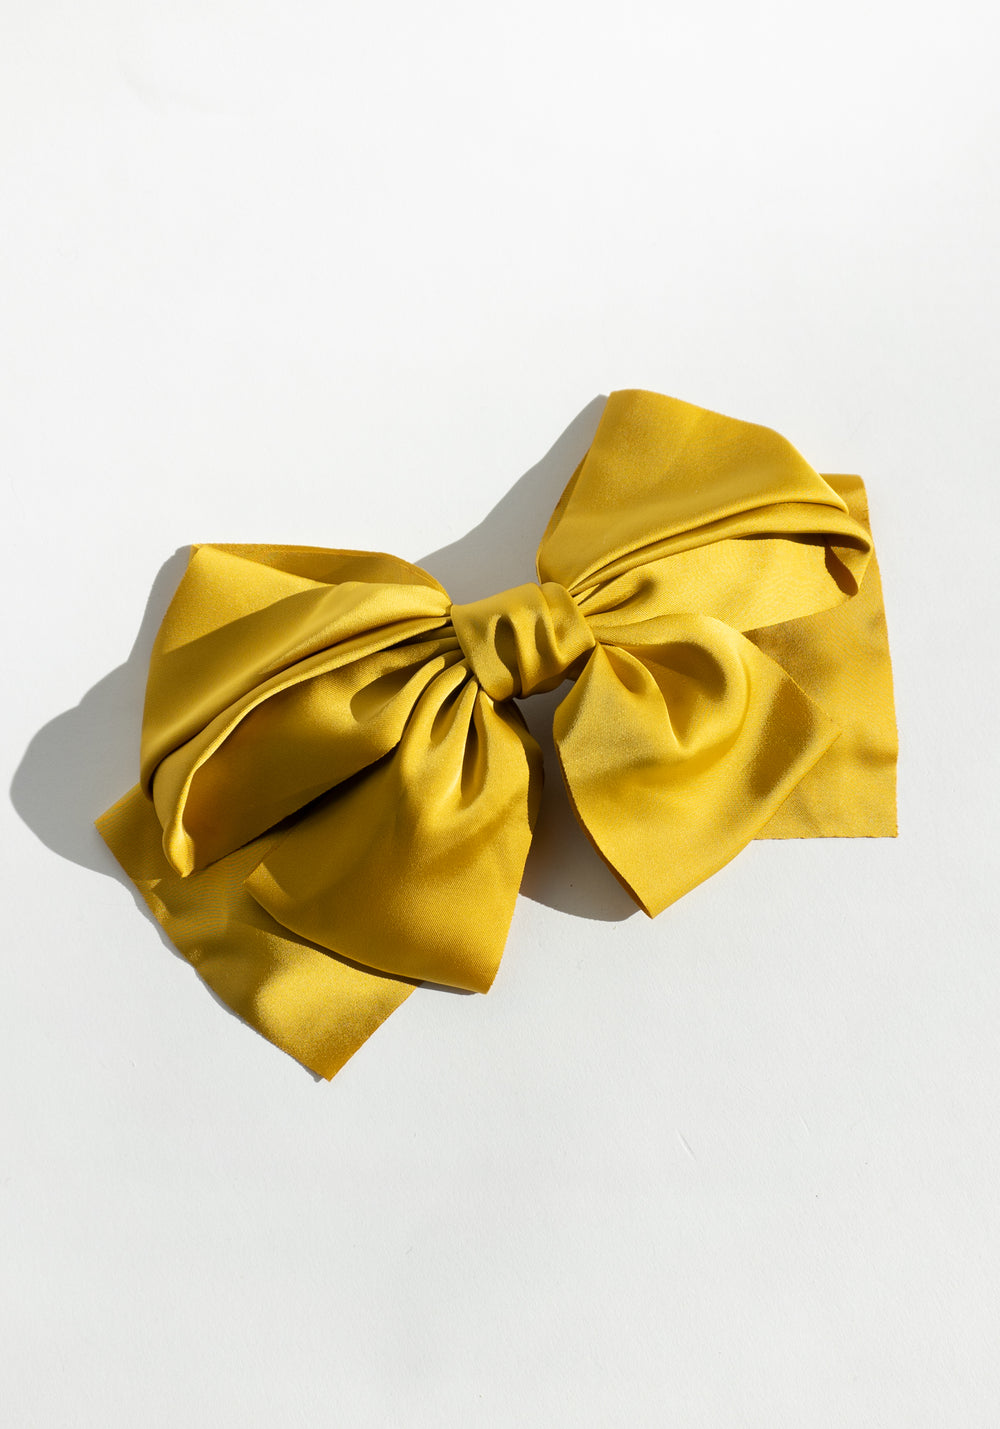 Giant Satin Bow Hair Clip in Yellow